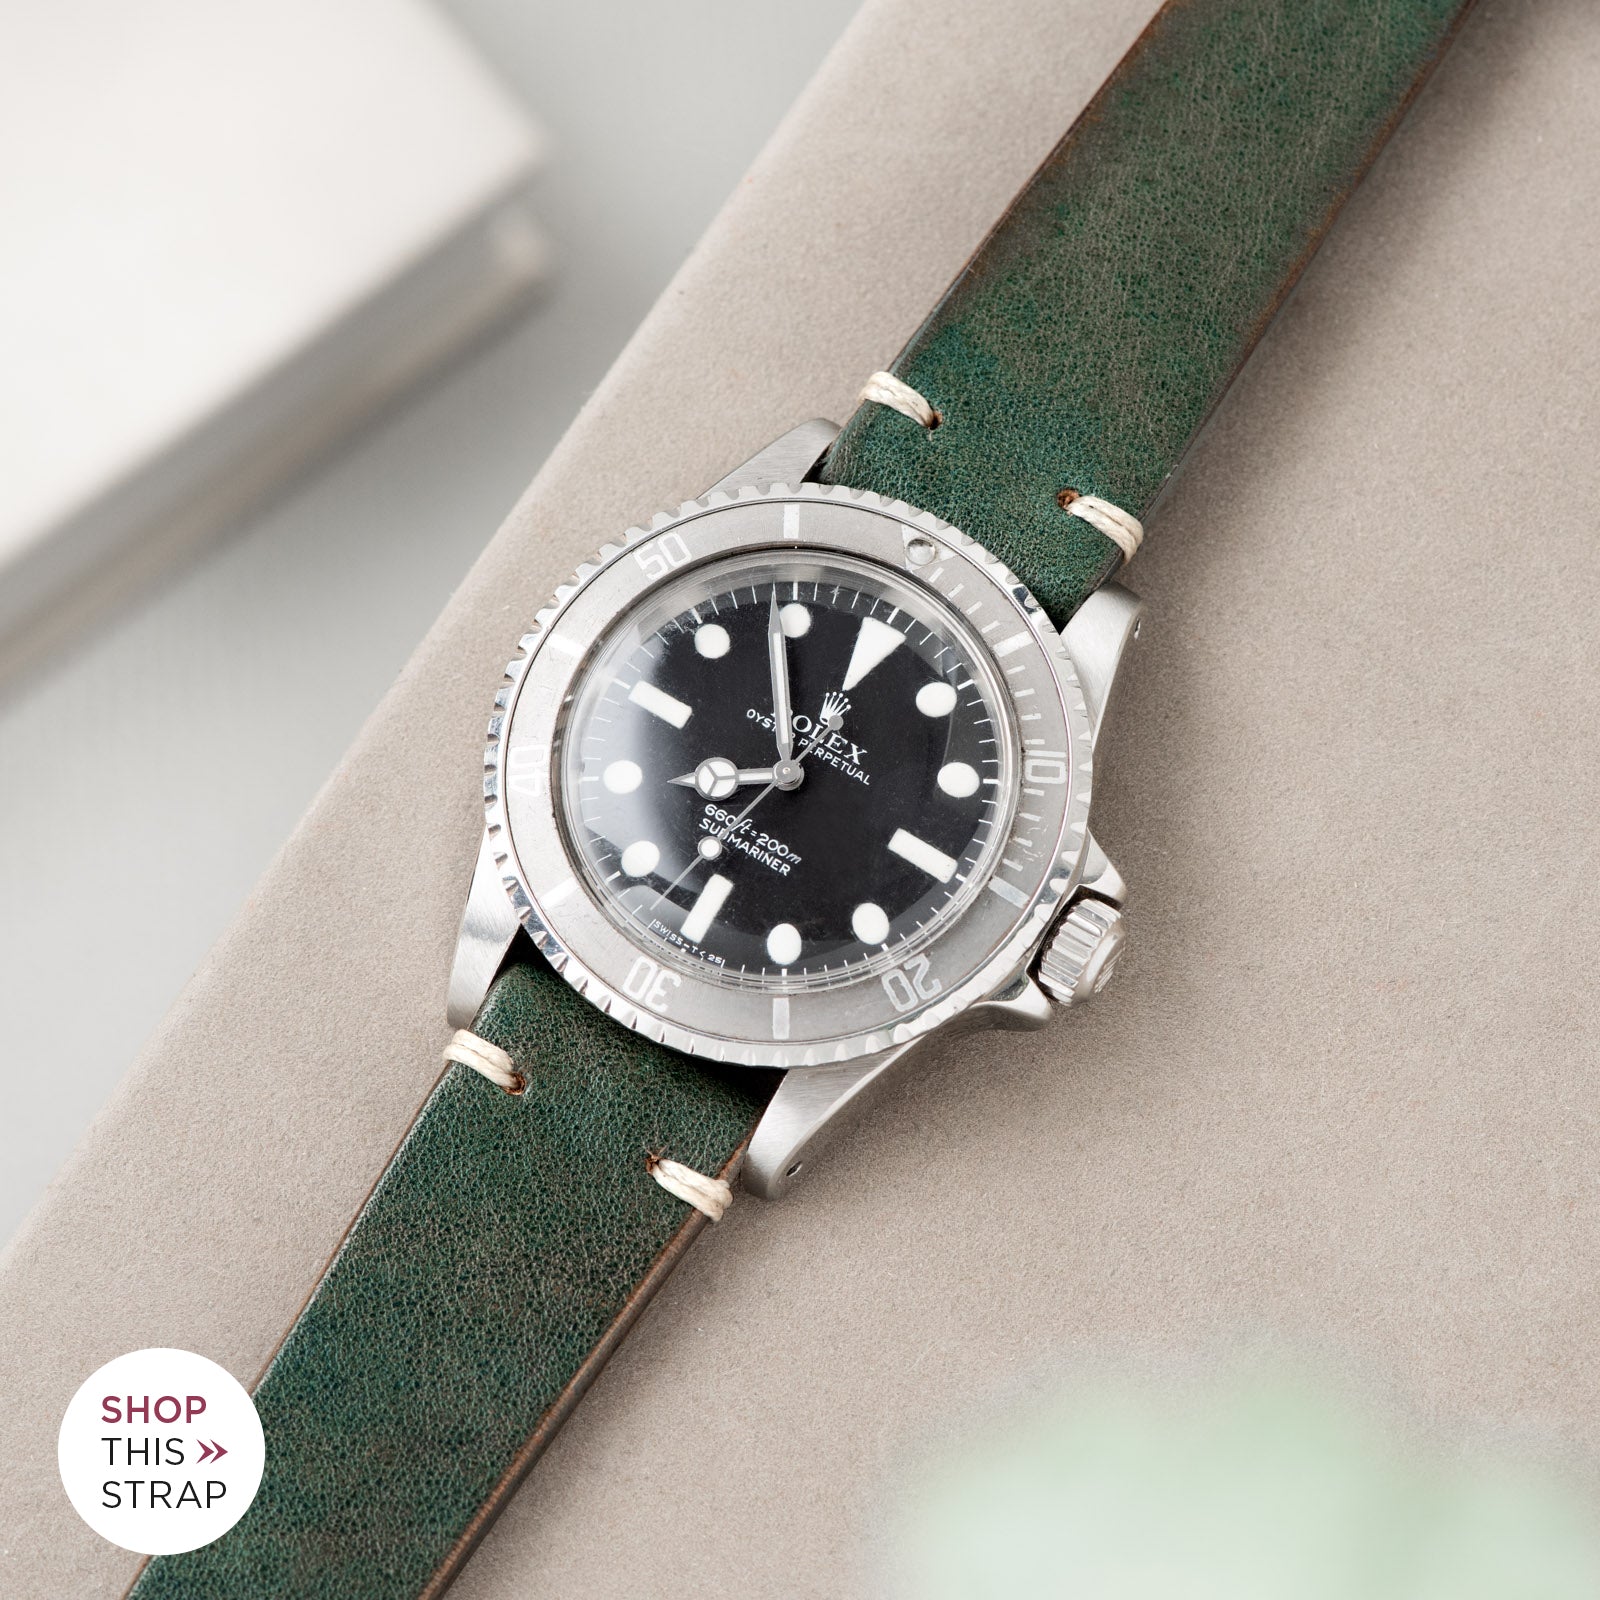 Bulang and Sons_Strap Guide_The Rolex 5513 Faded Maxi Submariner_Vintage Green Leather Watch Strap